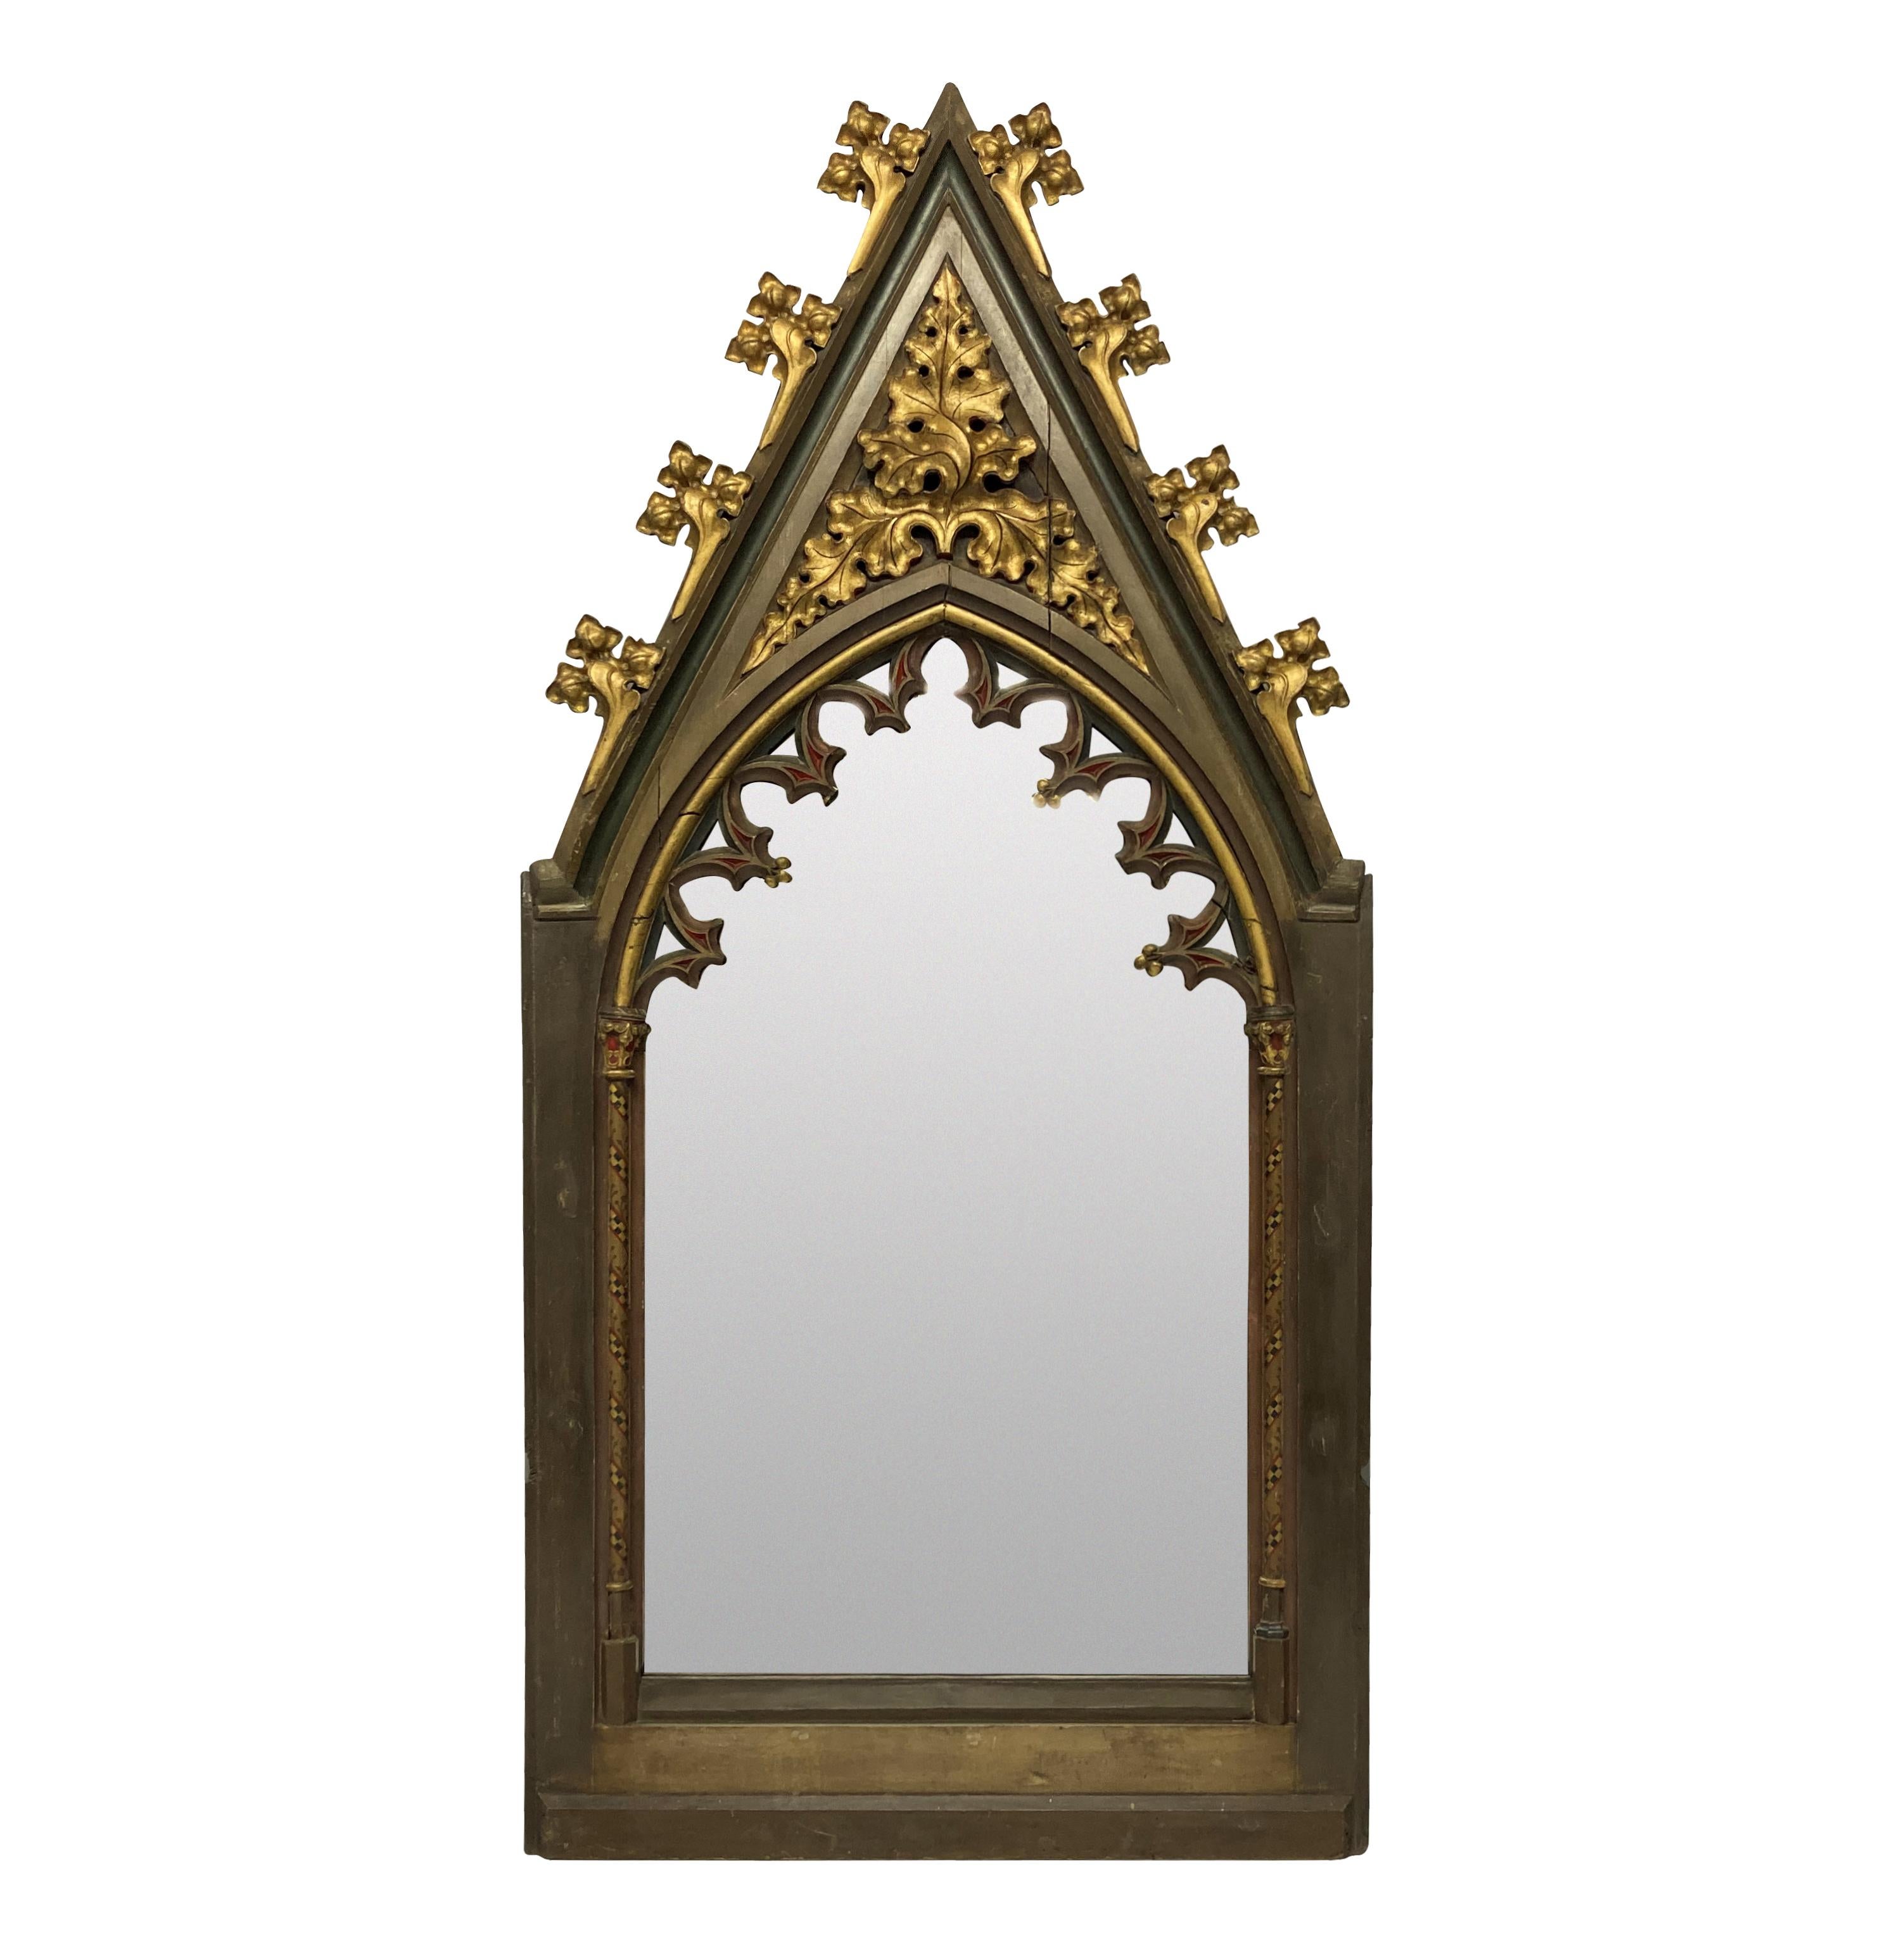 A pair of large English Gothic revival mirrors in polychrome painted and parcel gilded oak. Formerly part of an internal screen or blind arcading, school of Augustus Pugin. The paints are the original.